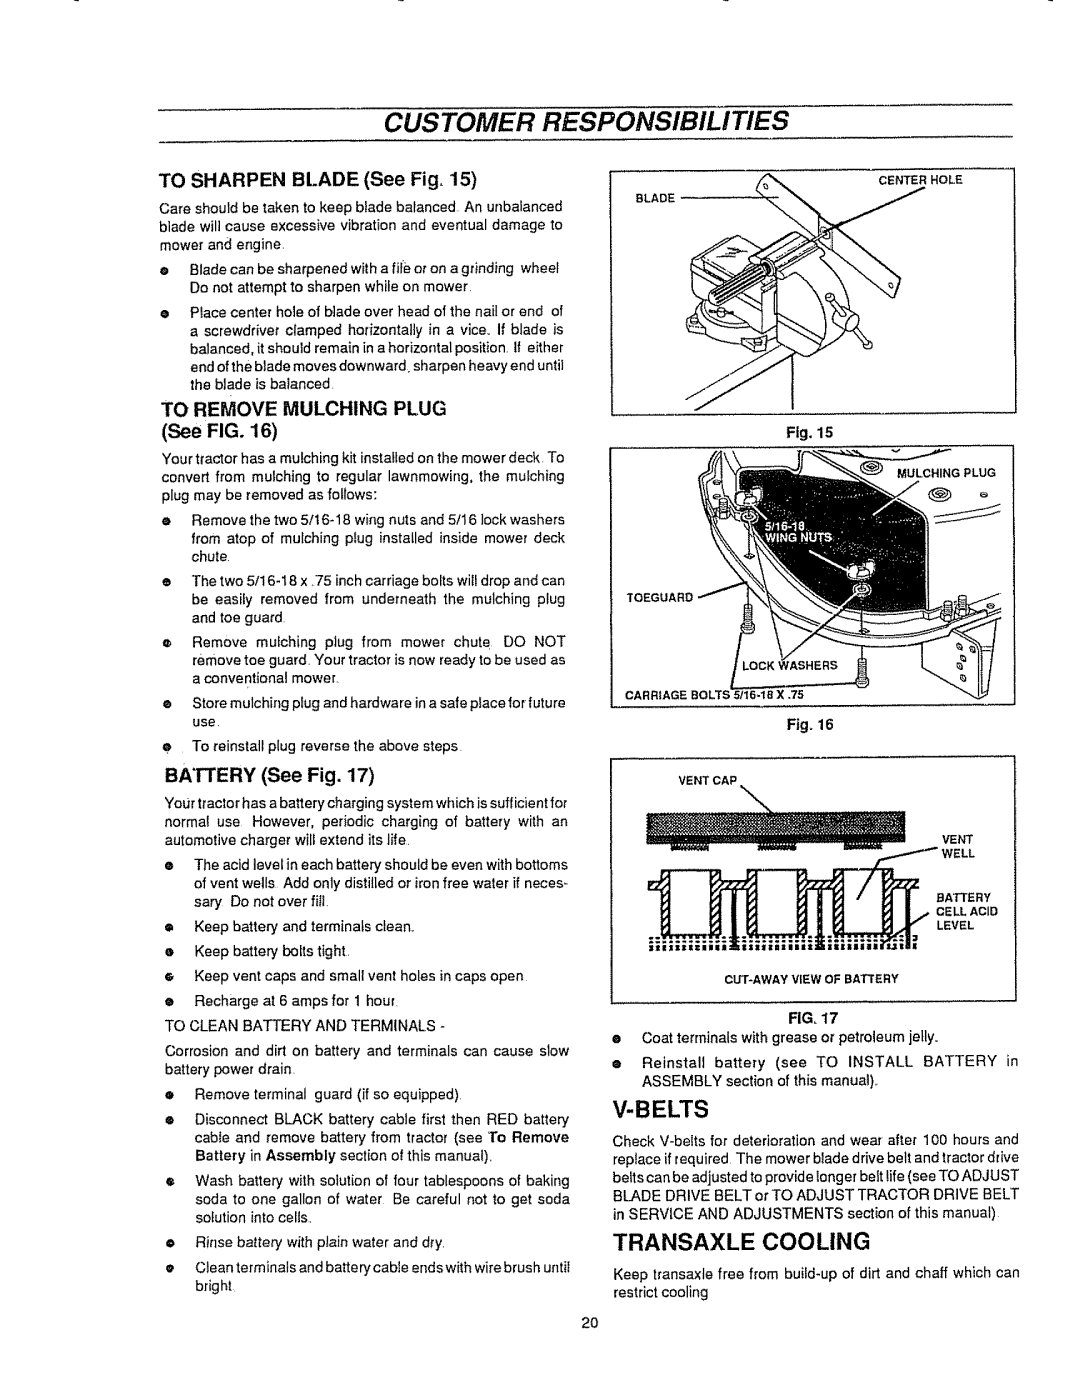 Sears 536.25587 Customer Responsibilities, V-Belts, Transaxle Cooling, TO SHARPEN BLADE See Fig=, BATTERY See Fig 